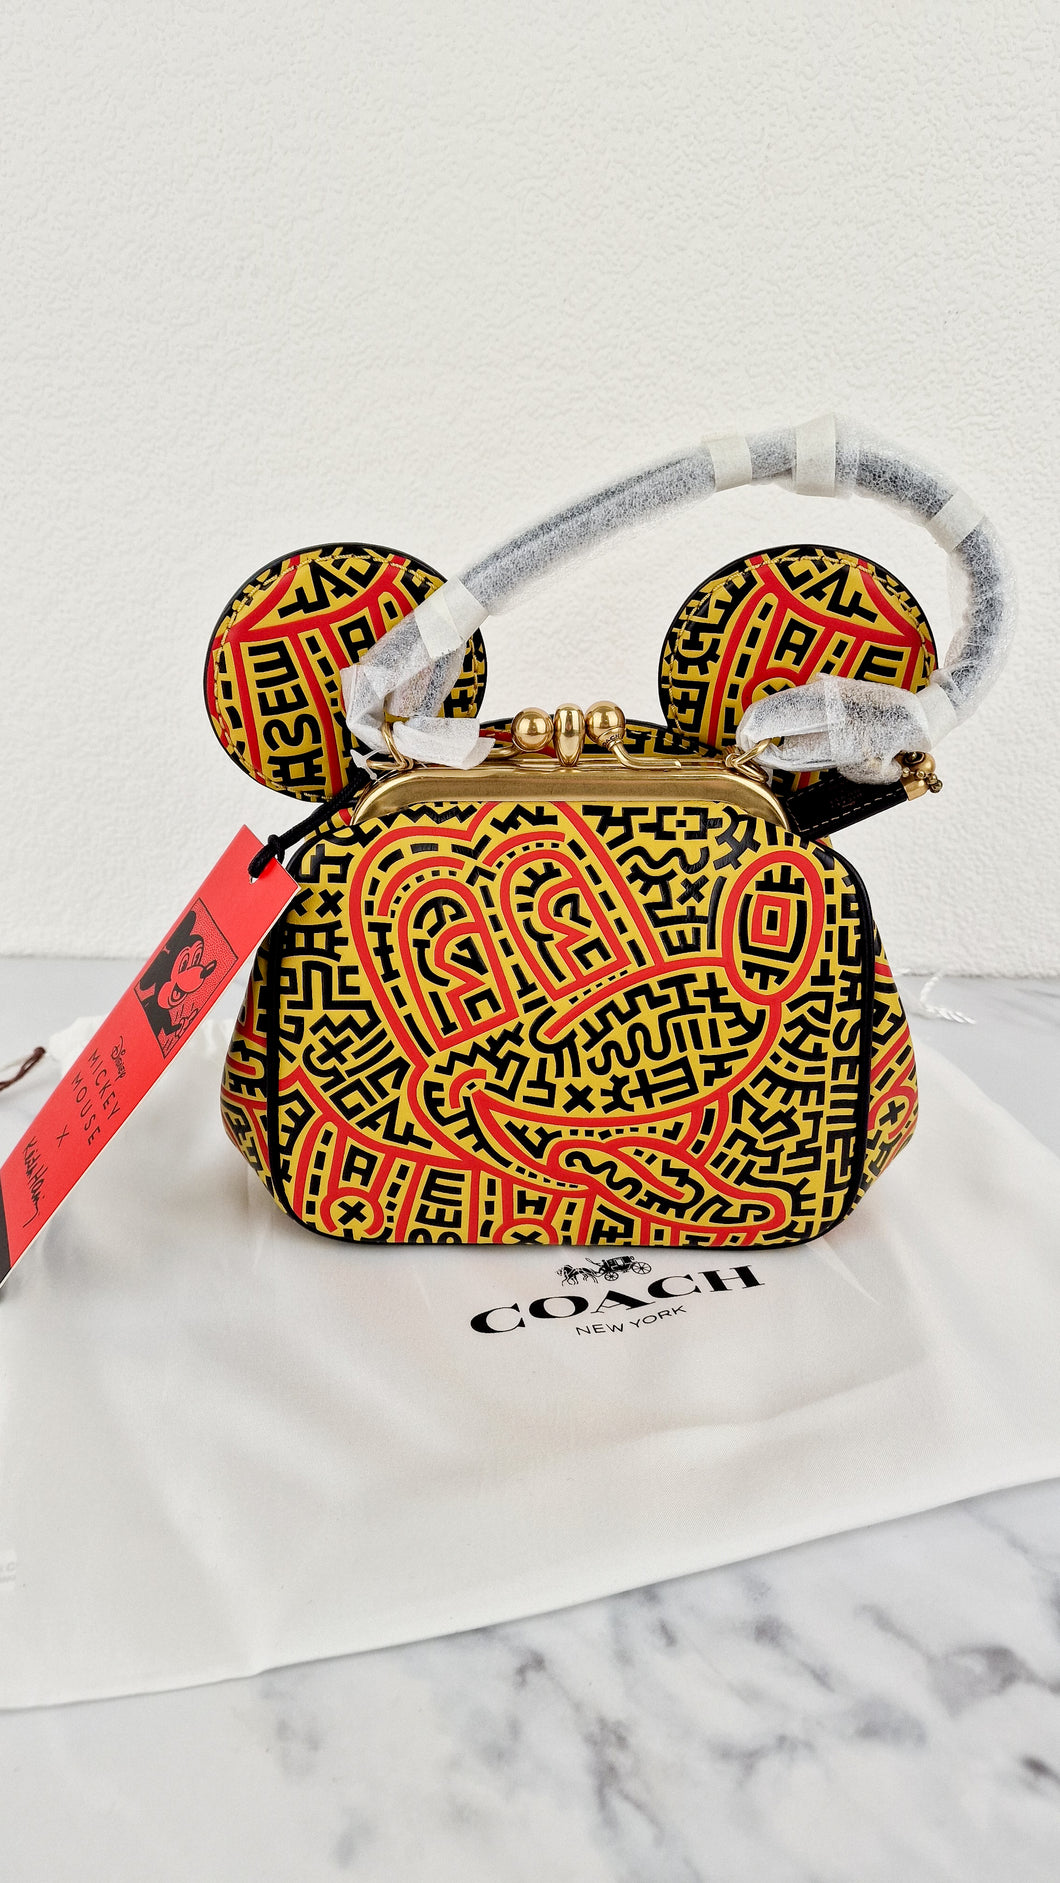 Coach 1941 Disney x Keith Haring Mickey Mouse Ears Kisslock Bag with Maze Artwork Red & Yellow Leather - Coach 7418